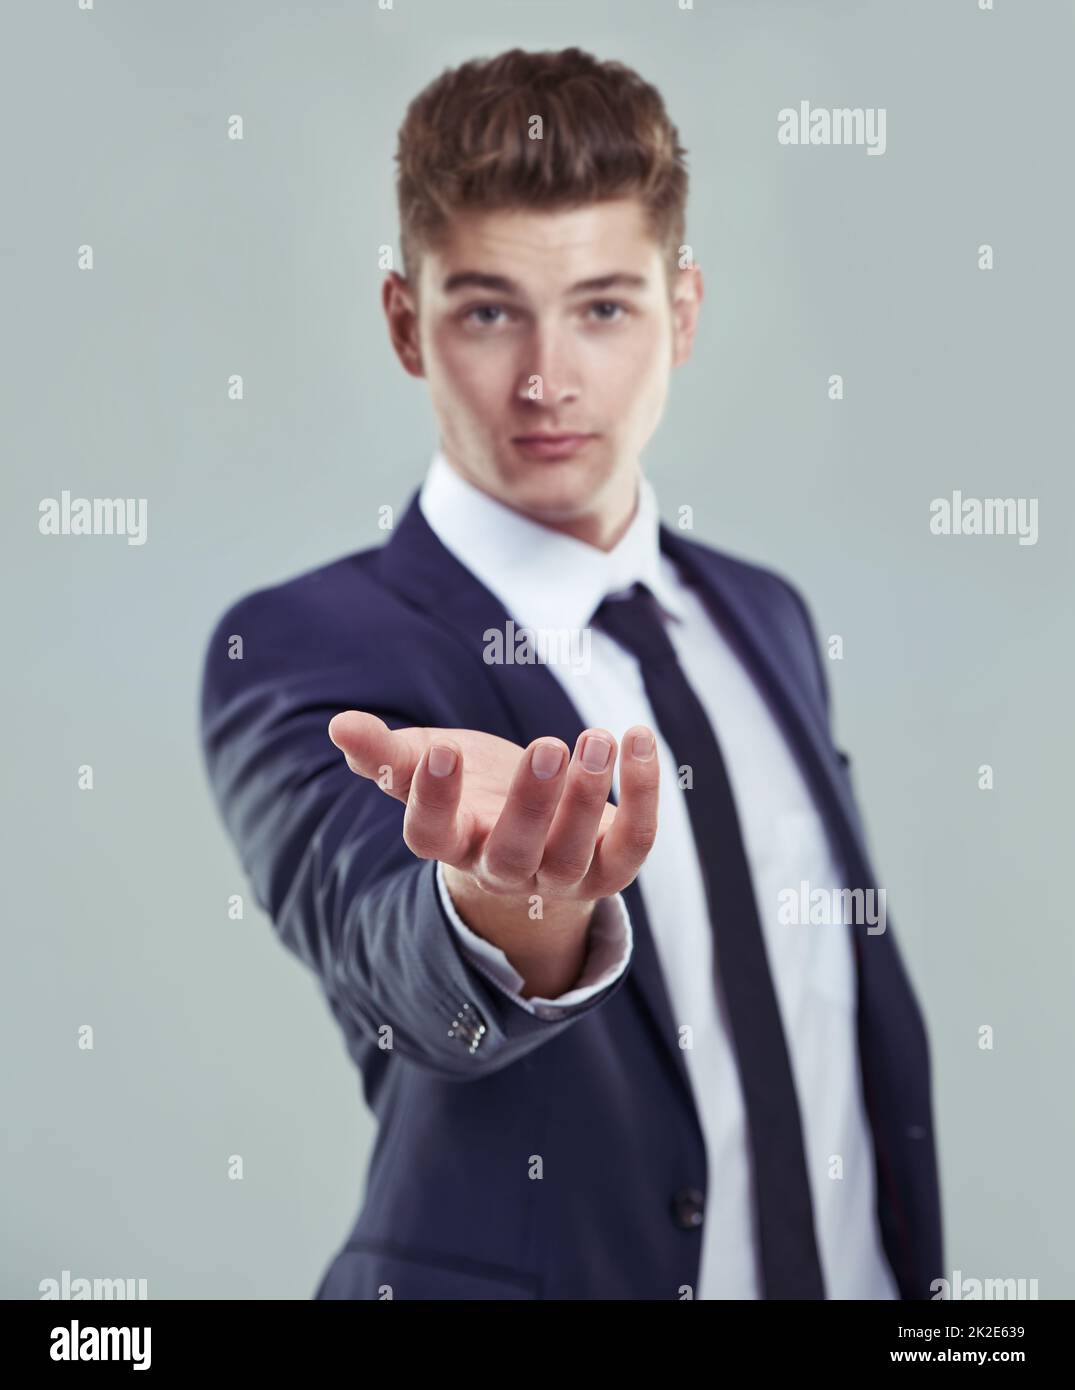 Welcome to the digital age. Concept studio shot of a young businessman standing with his open palm raised to the camera. Stock Photo